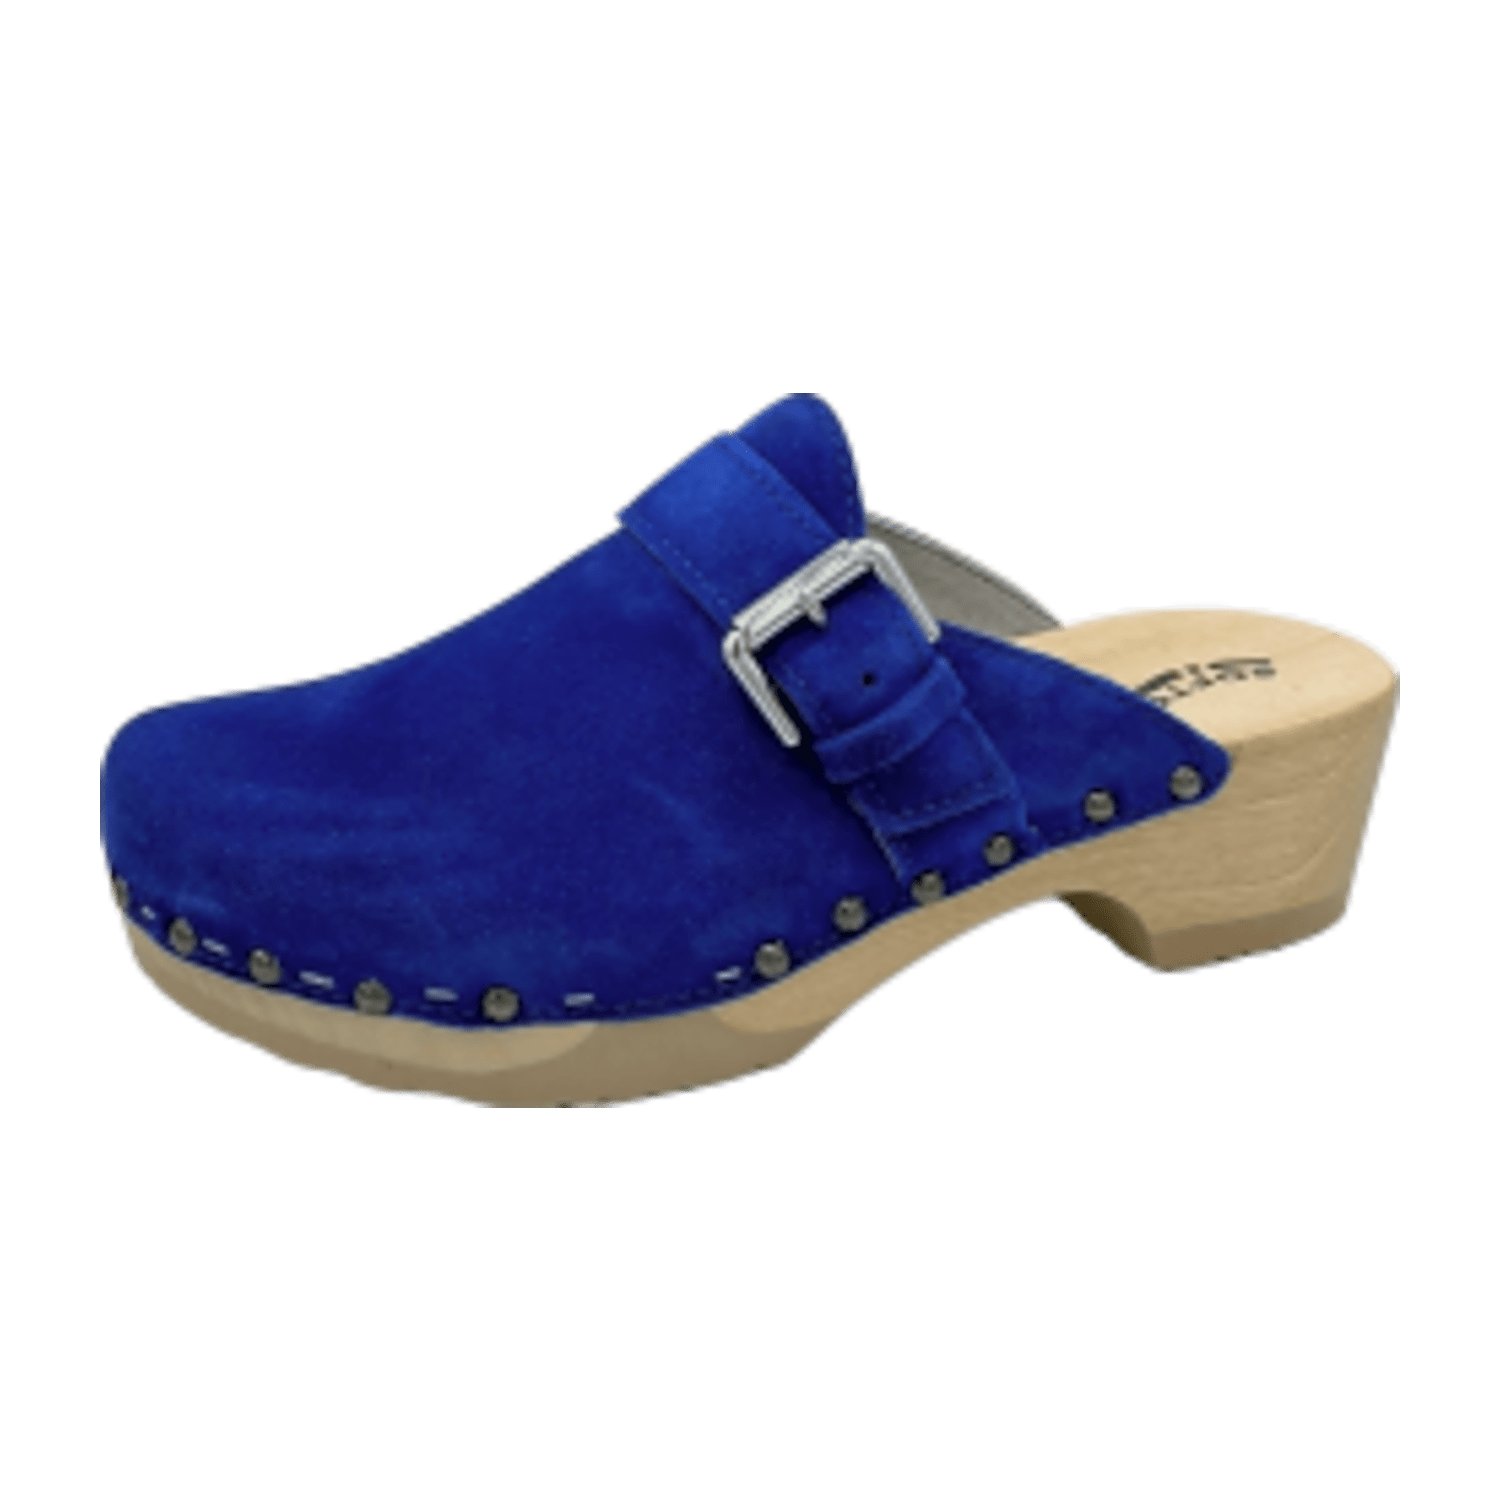 Softclox Tomma blue